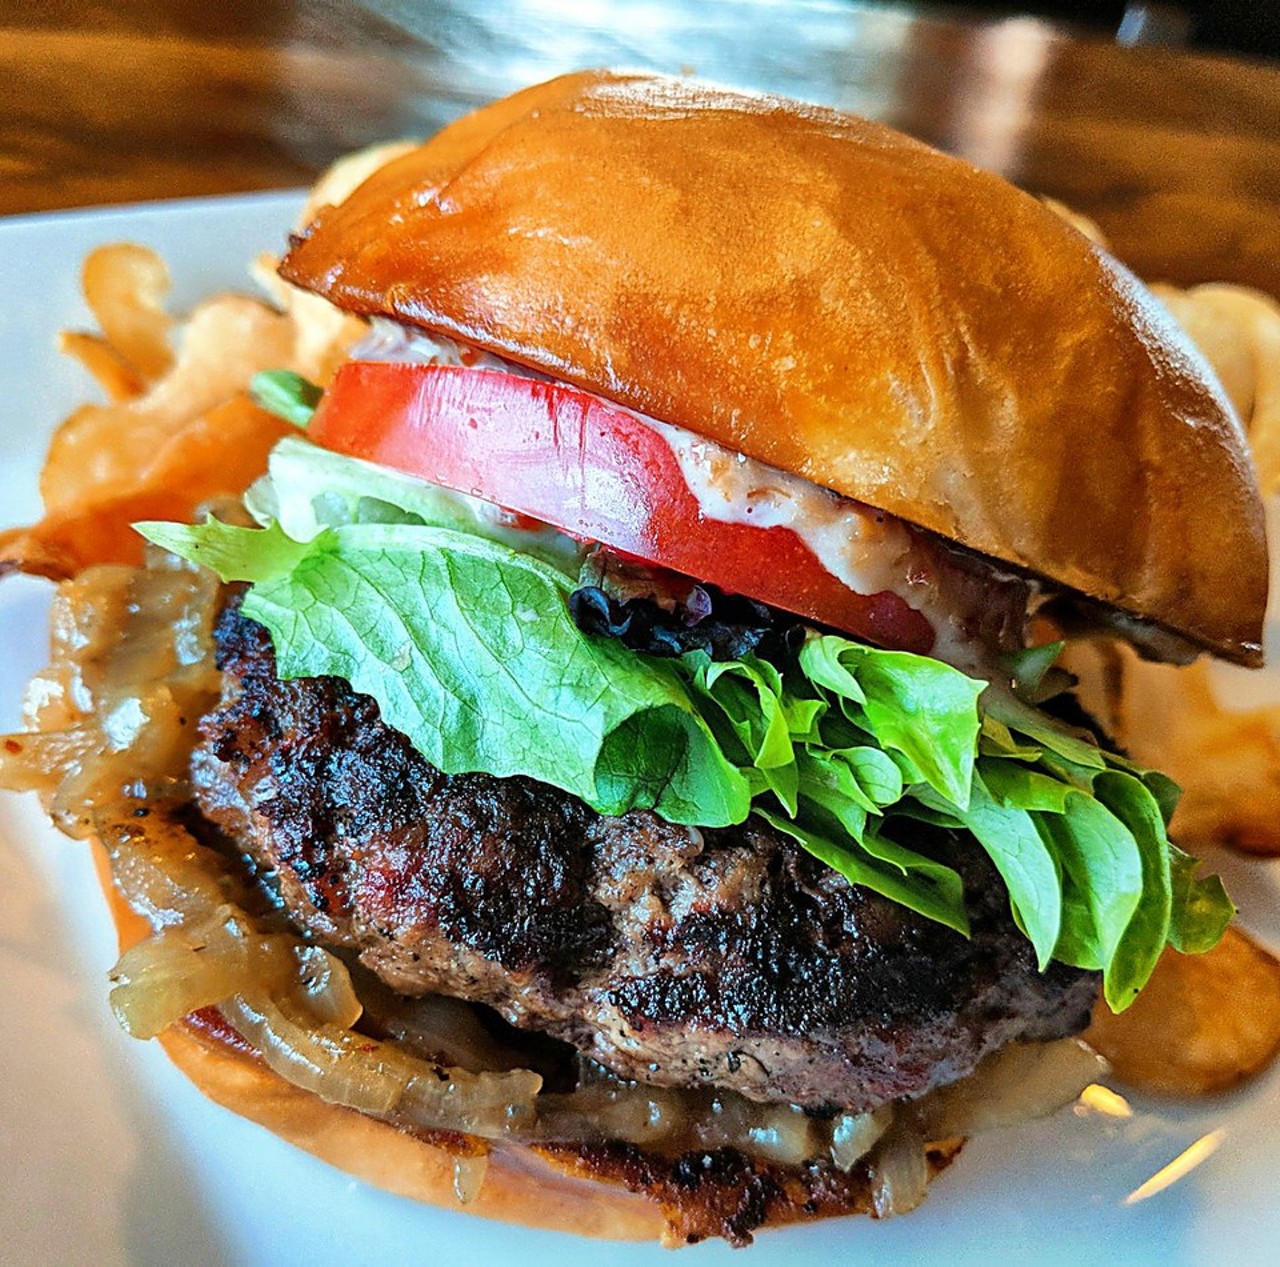 Crooked Spoon: Blue Point Burger - Angus beef patty, Blue Point Toasted Lager braised onions, bacon gastrique aioli, mixed greens, tomato, Aleppo & Urfa pepper crusted brioche bun. $3 more gets you a Blue Point Toasted Lager Draft.